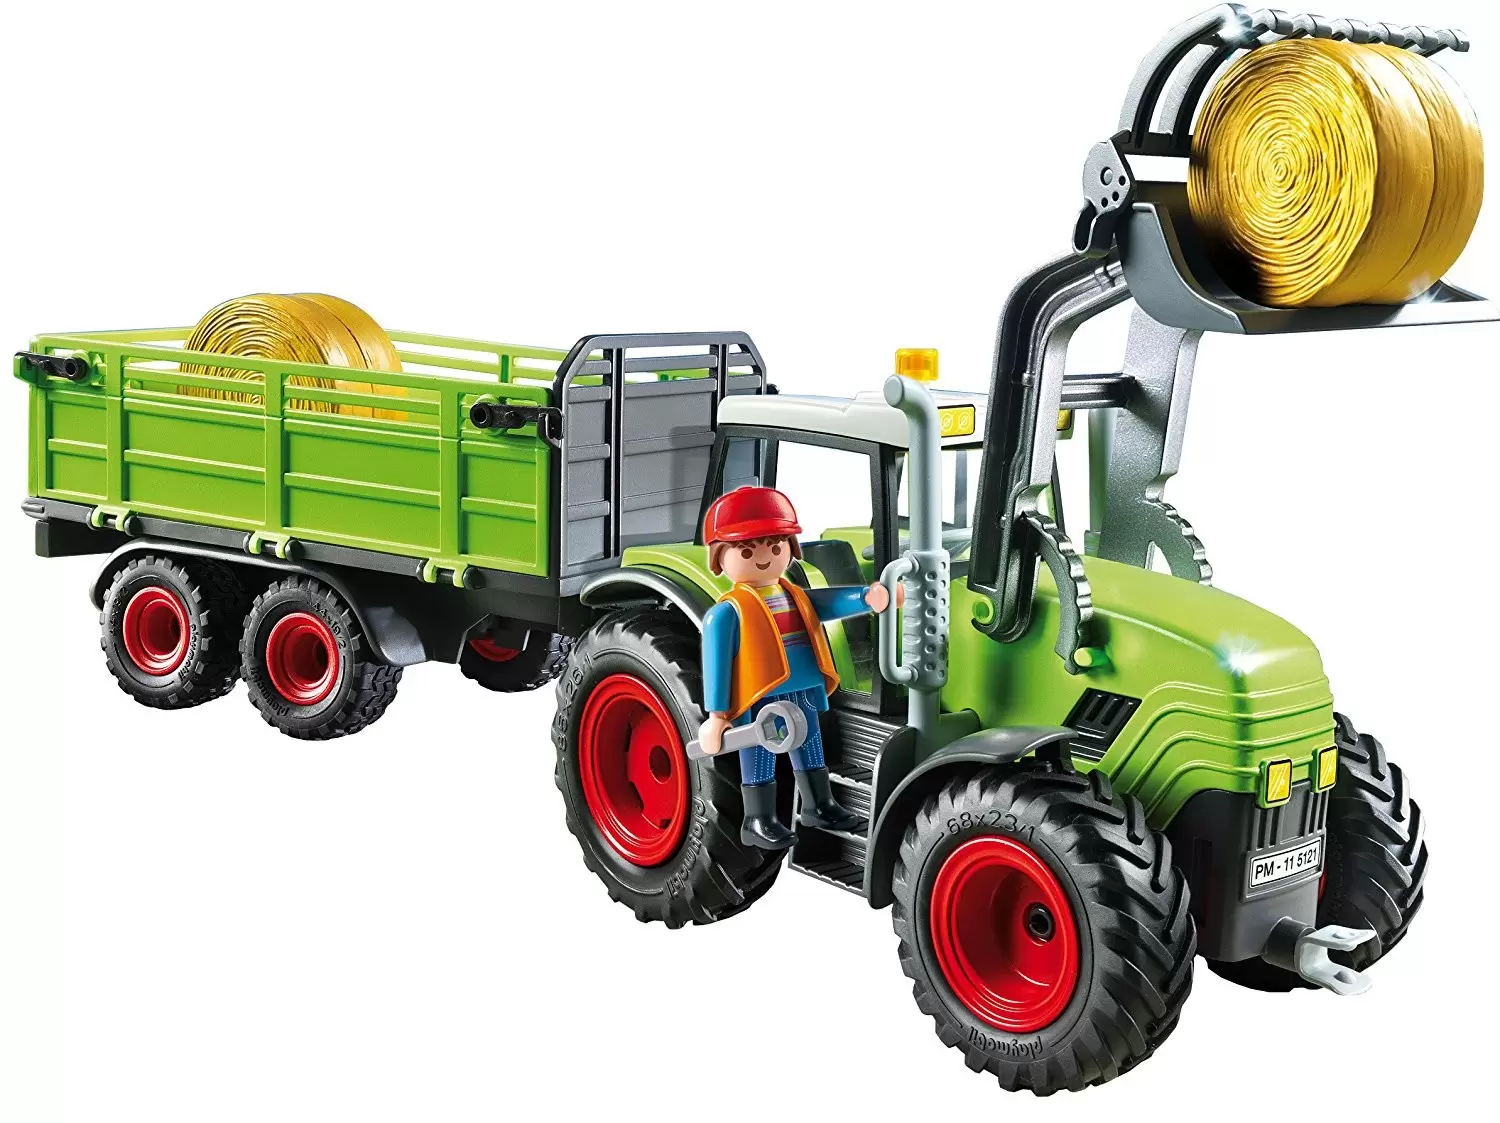 Playmobil Farmers - Hay Baler with Trailer